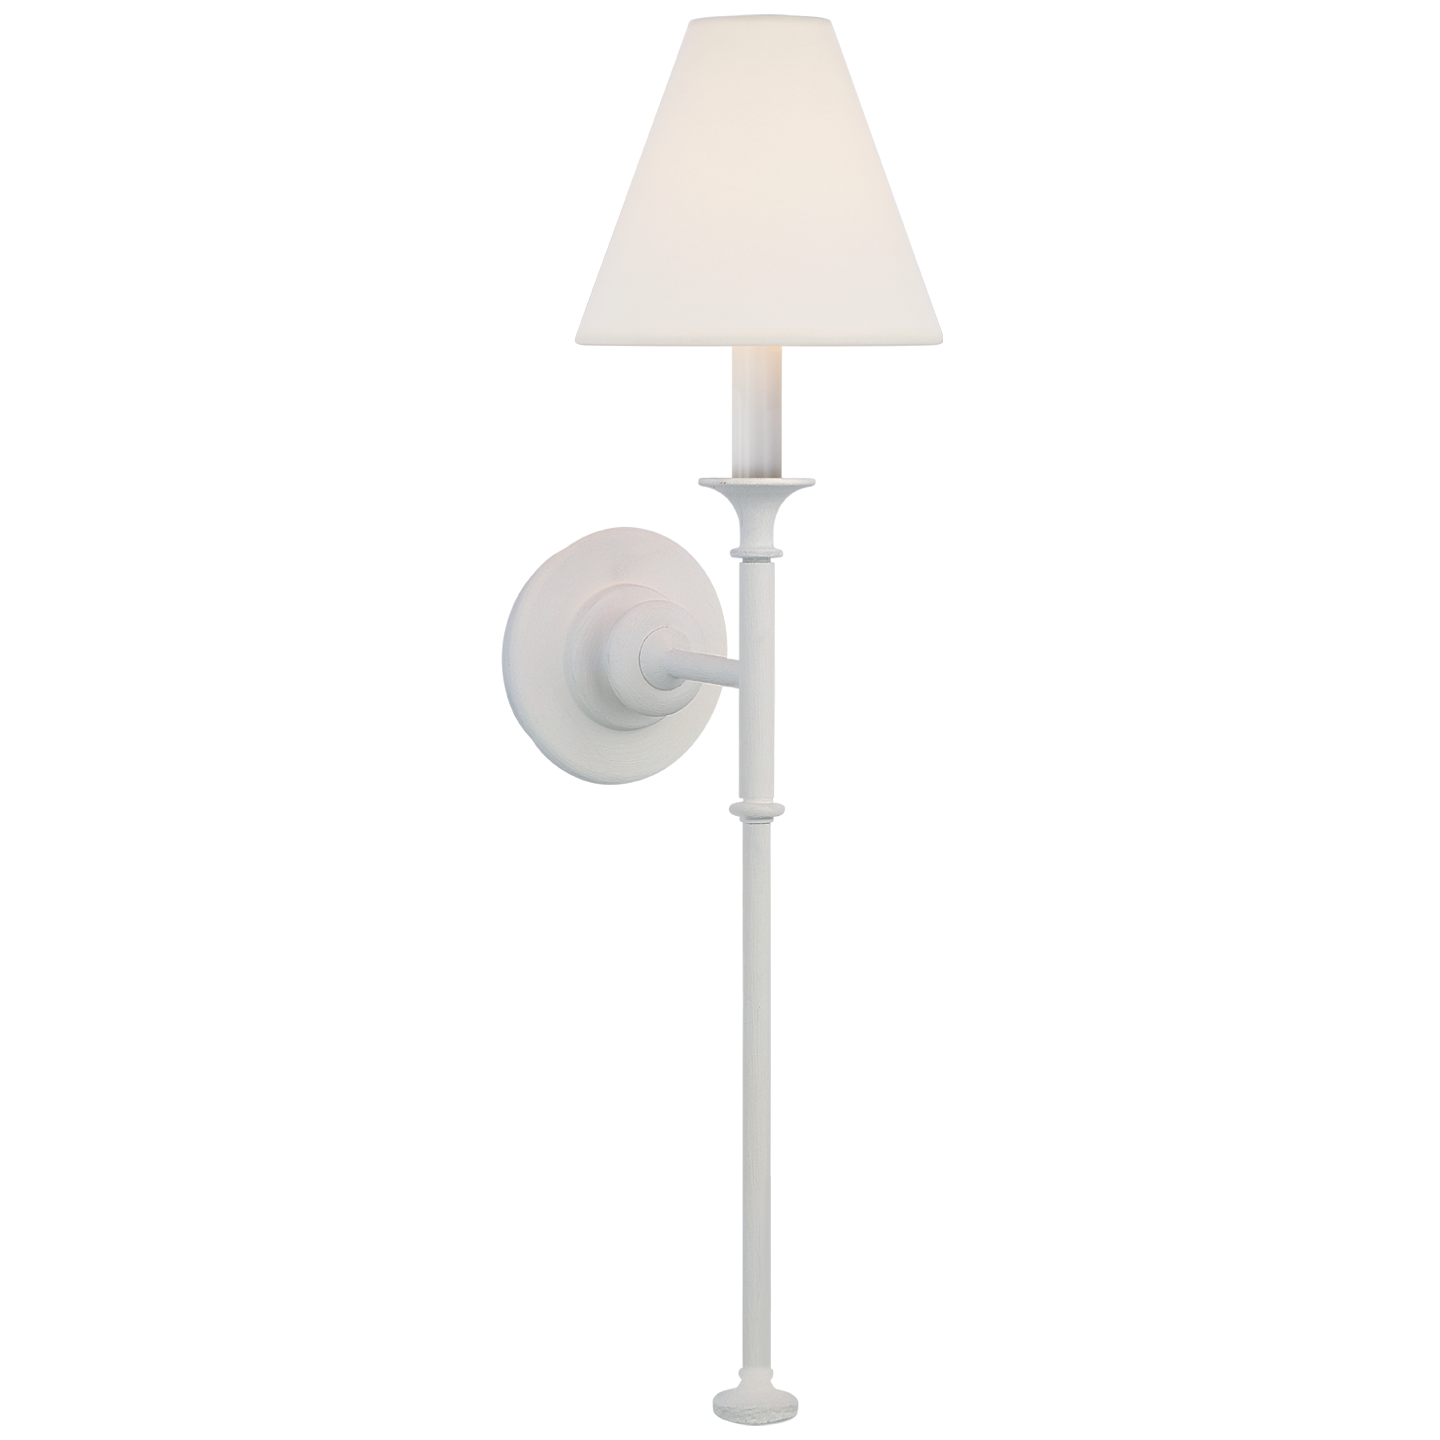 This long, knobby Piaf Large Tail Sconce is the perfect detail to add to any living room, bedroom, or other space needing an extra source of light!  Designer: Barbara Barry  Height: 19.25" Width: 7.5" Extension: 9" Backplate: 4.75" Round Socket: E26 Keyless Wattage: 60 A19 Weight: 4 Pounds